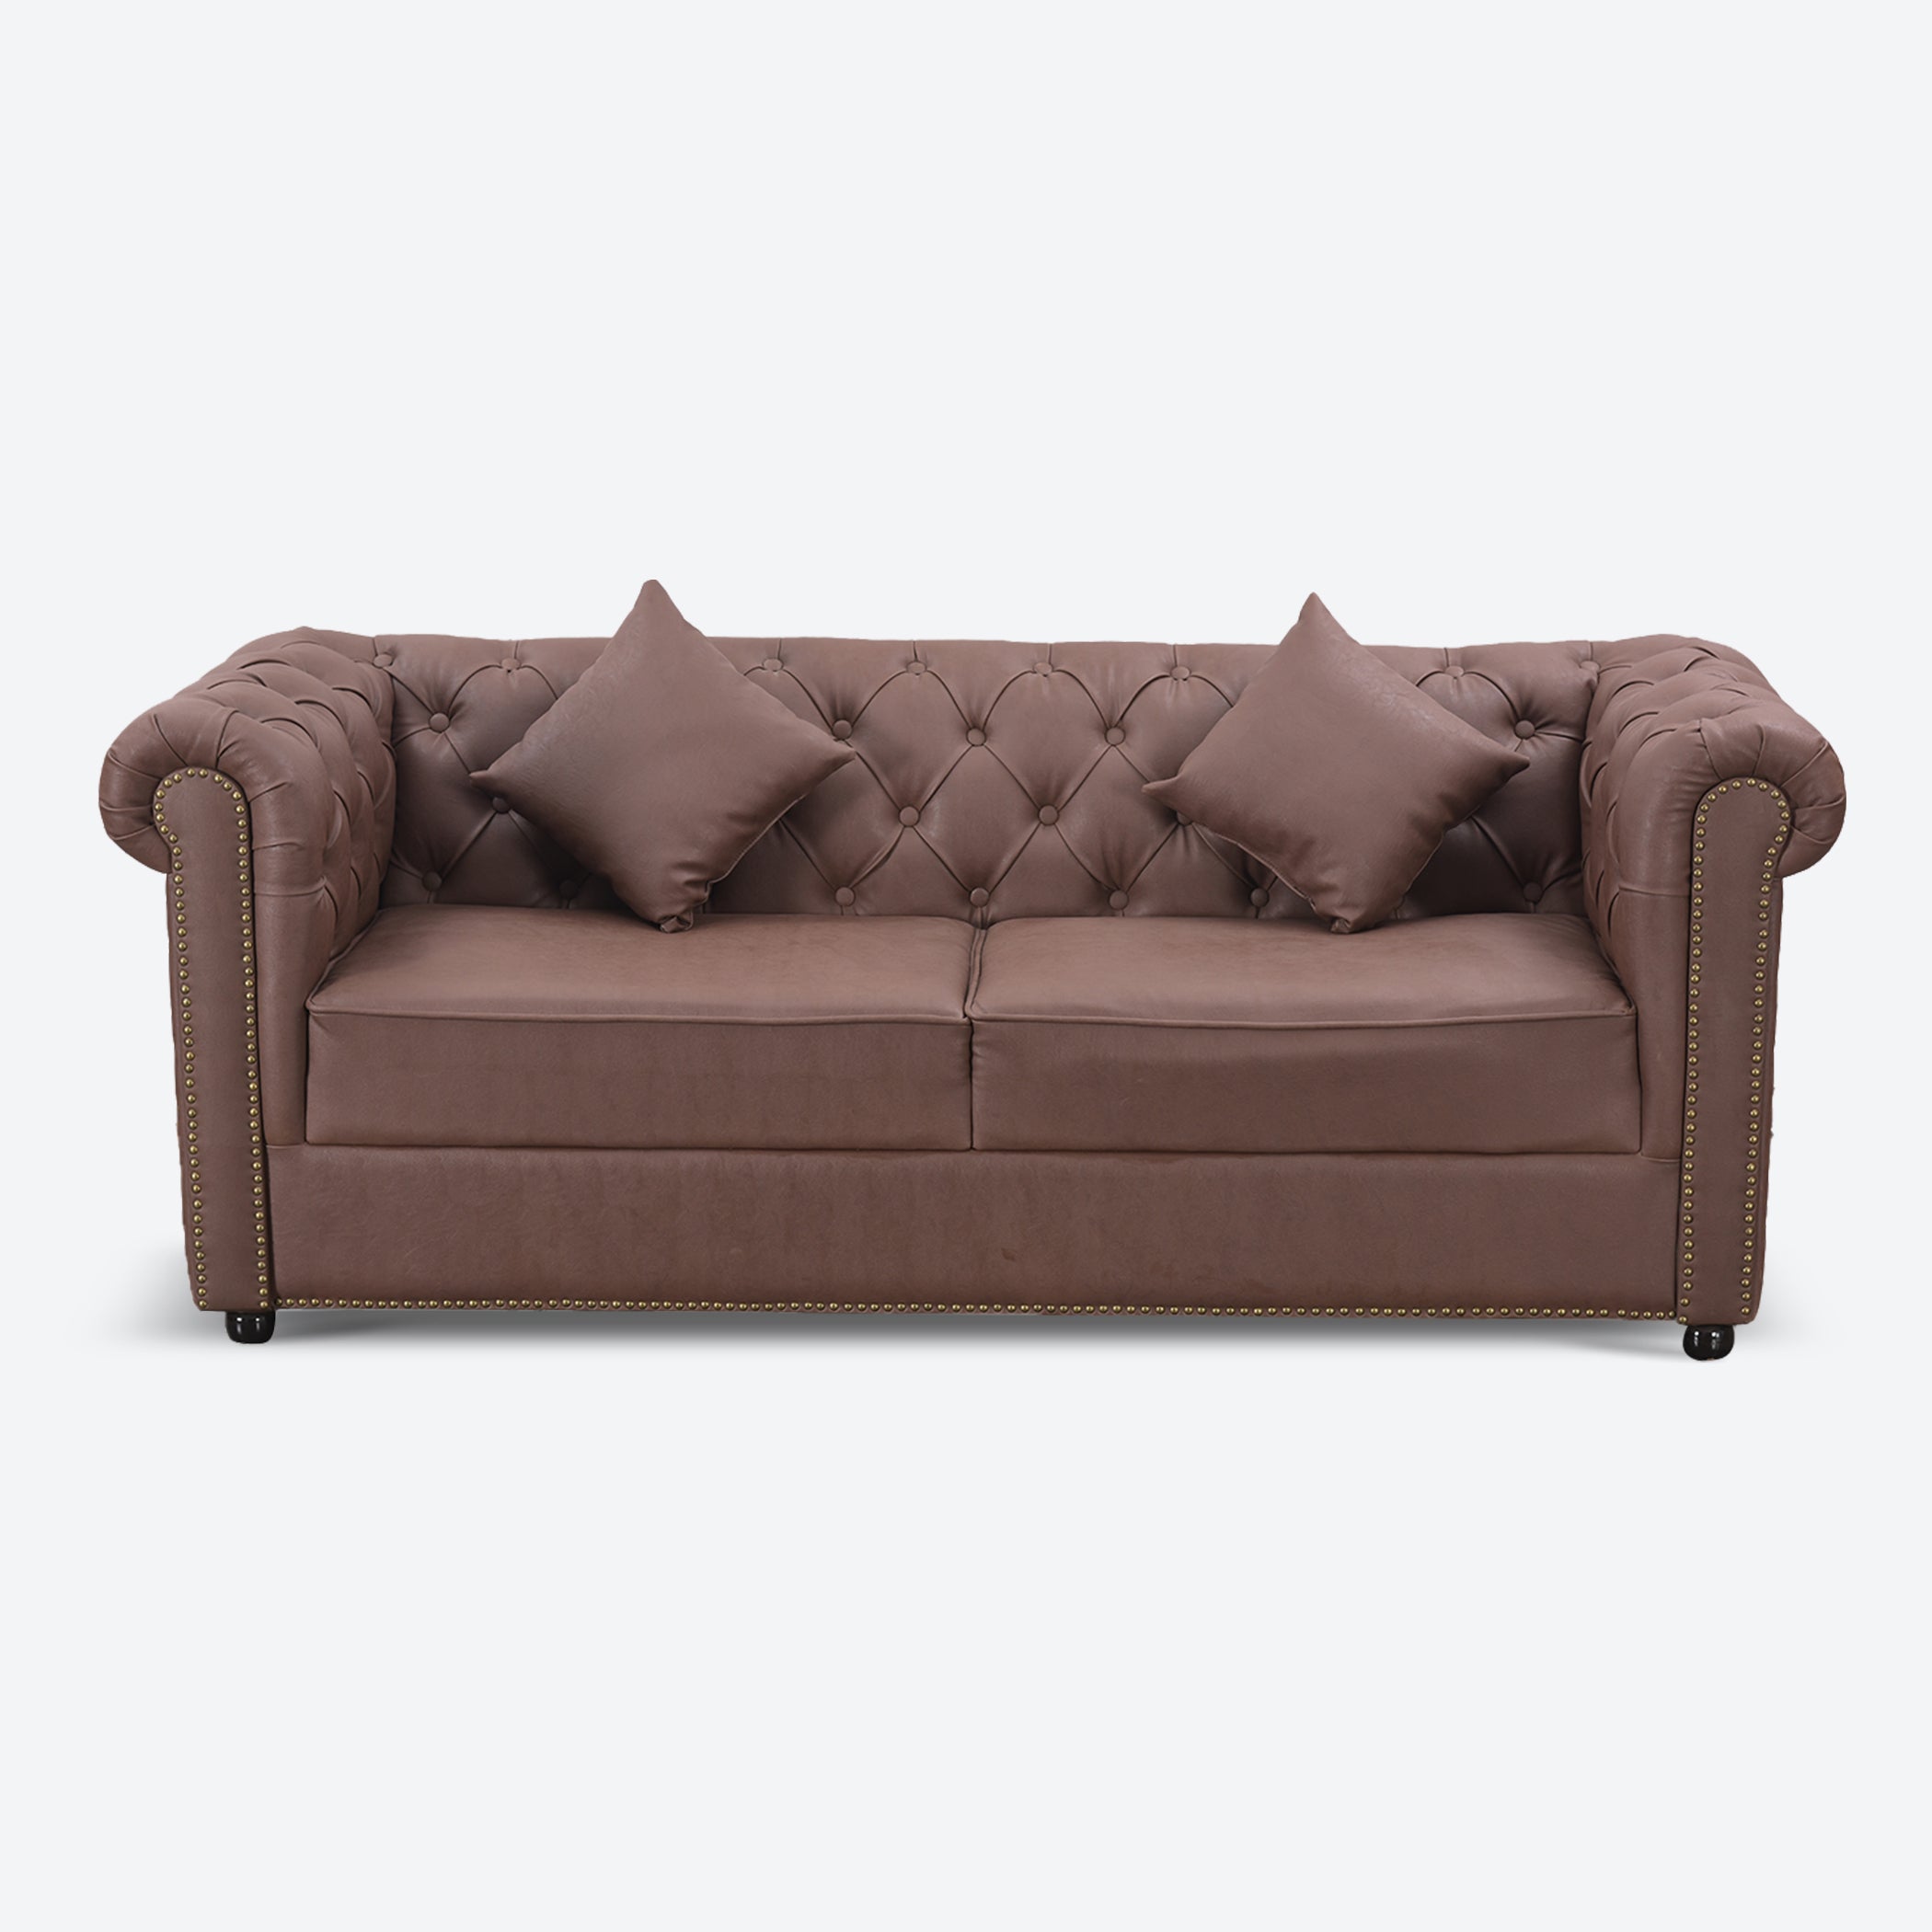 Chester Brown 3S Sofa by Zorin Zorin